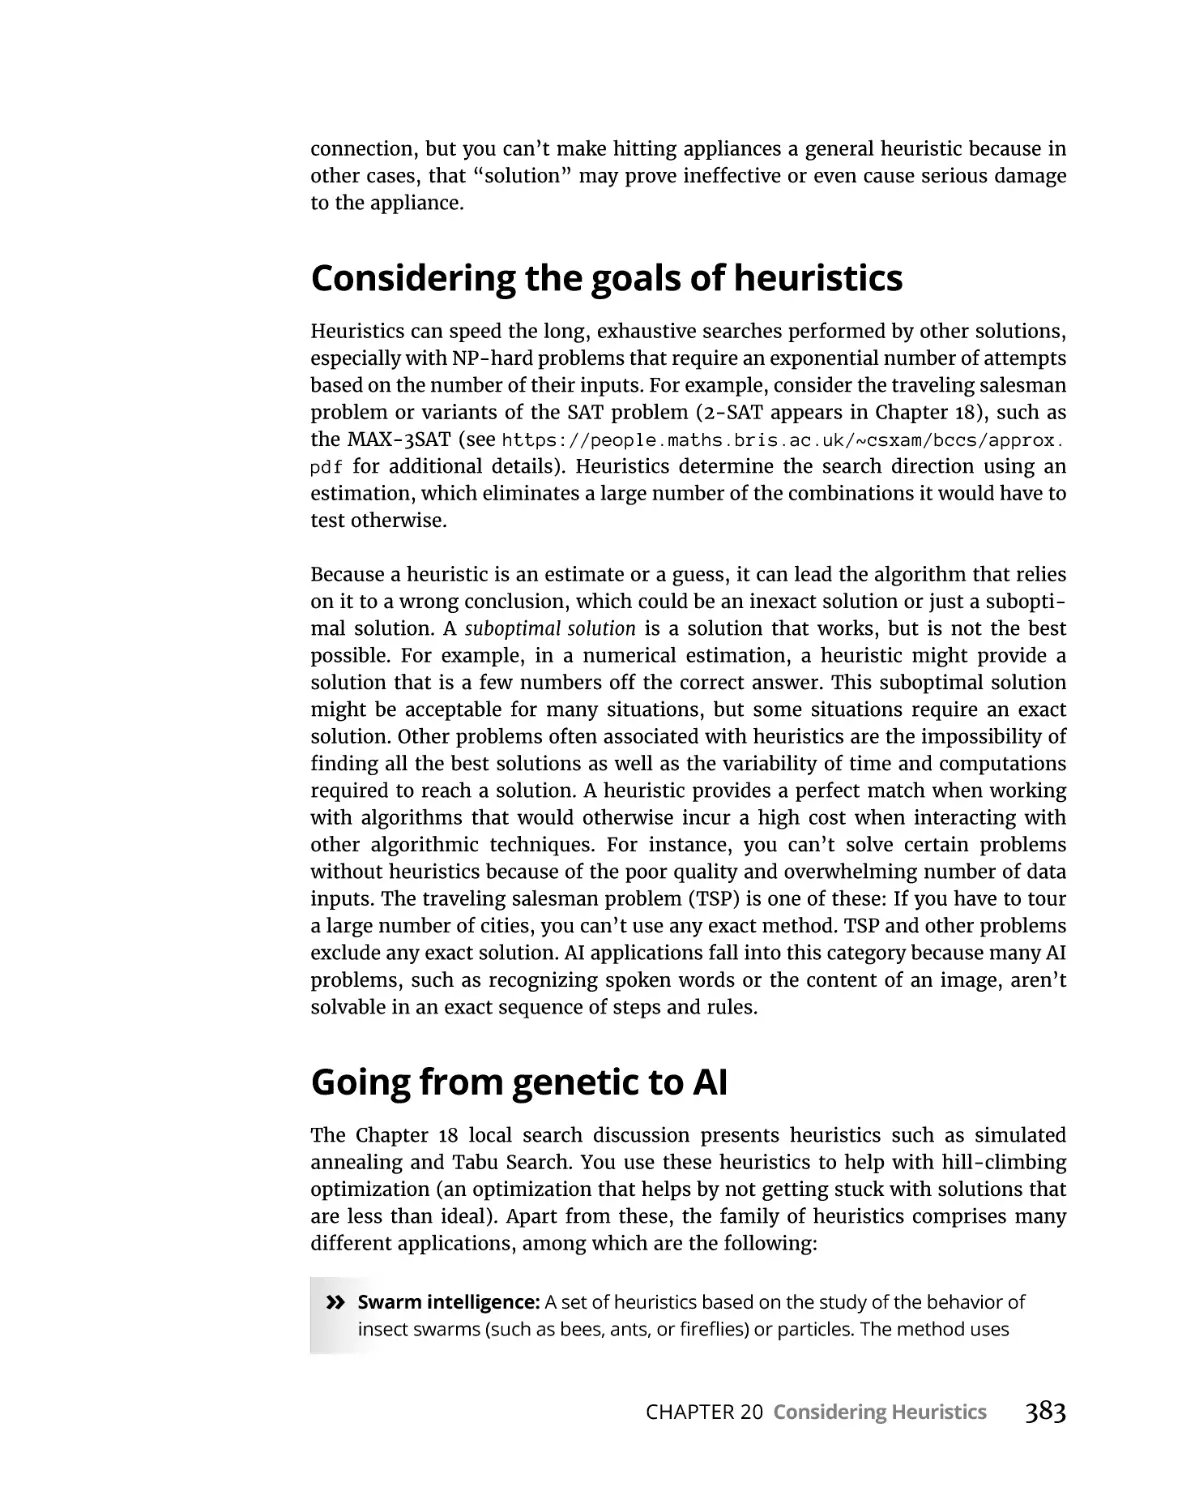 Considering the goals of heuristics
Going from genetic to AI